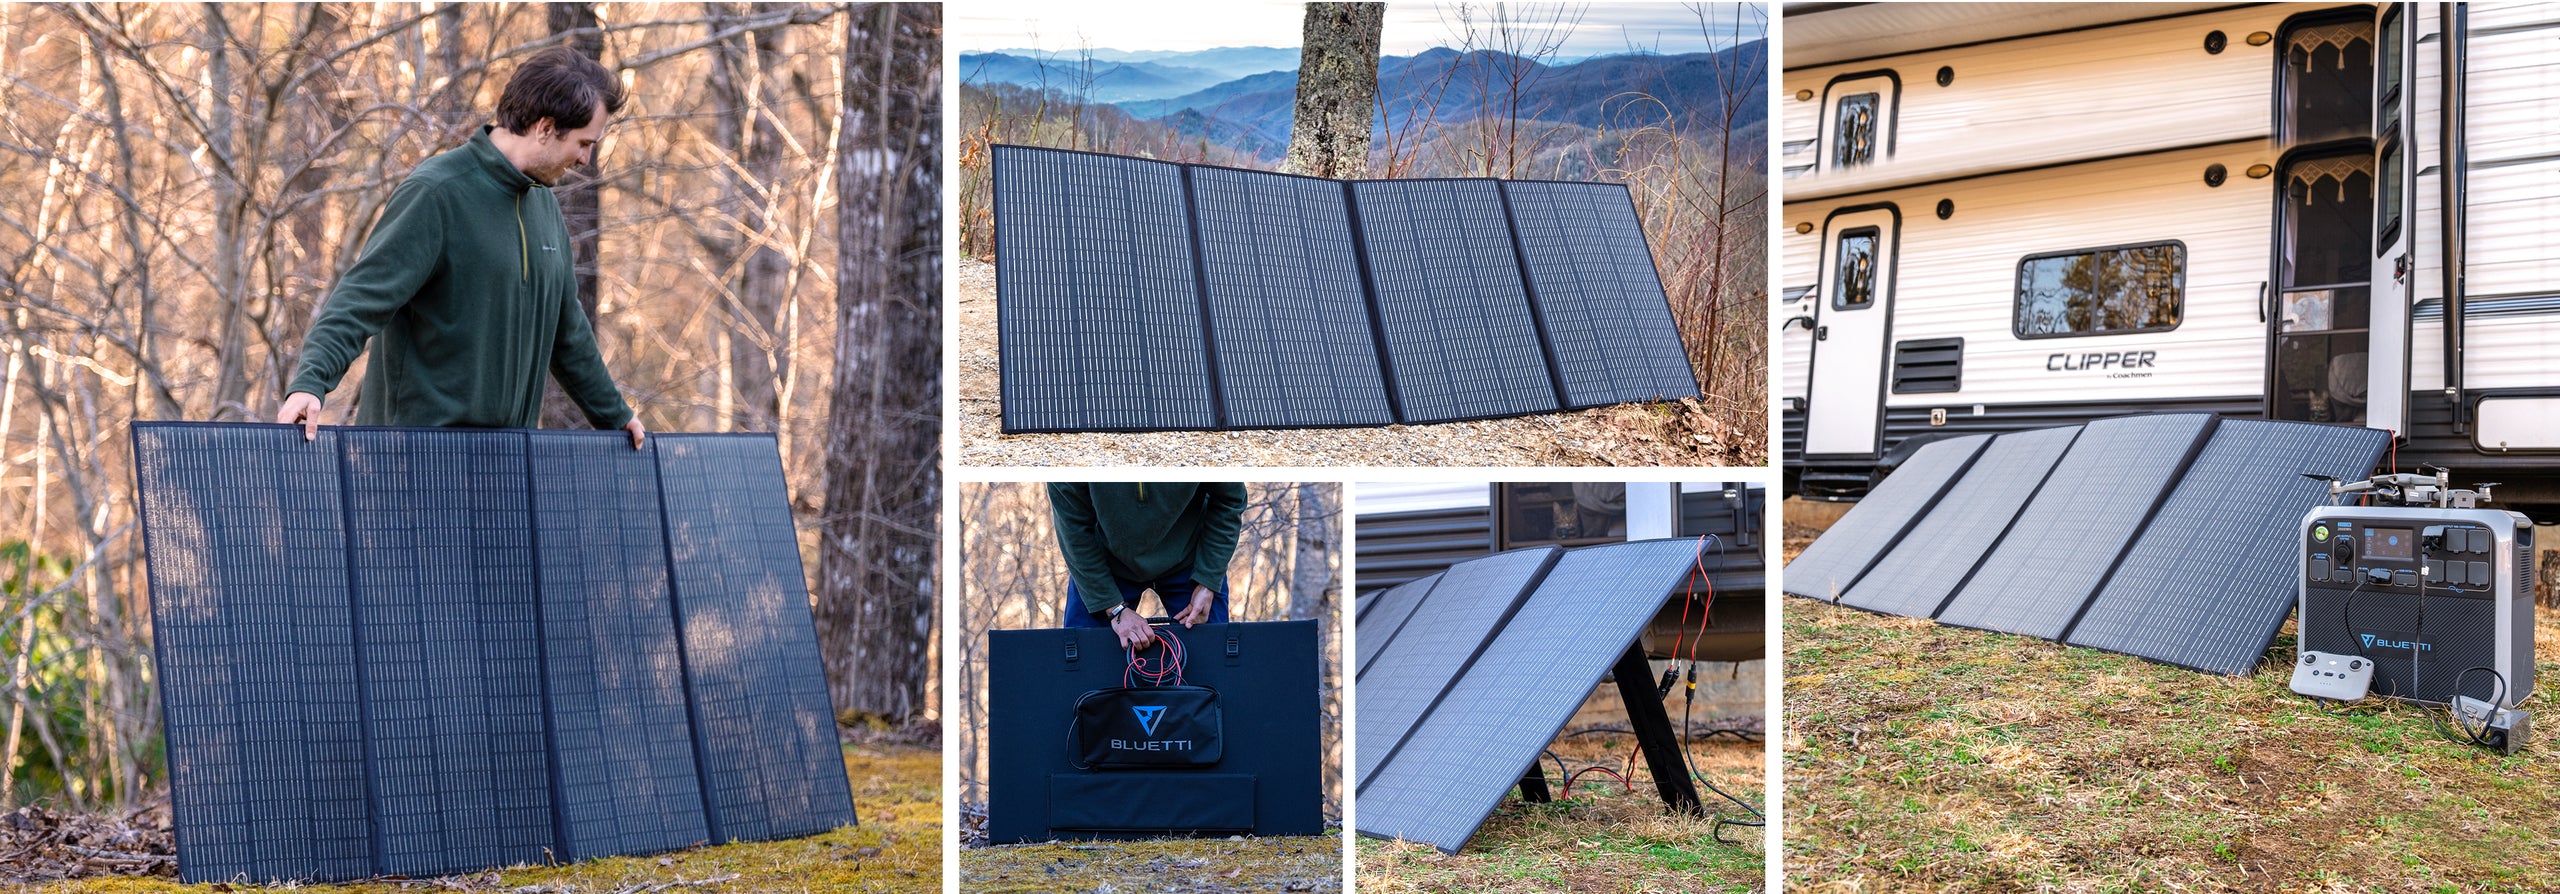 highly compatible bluetti pv350 solar panel